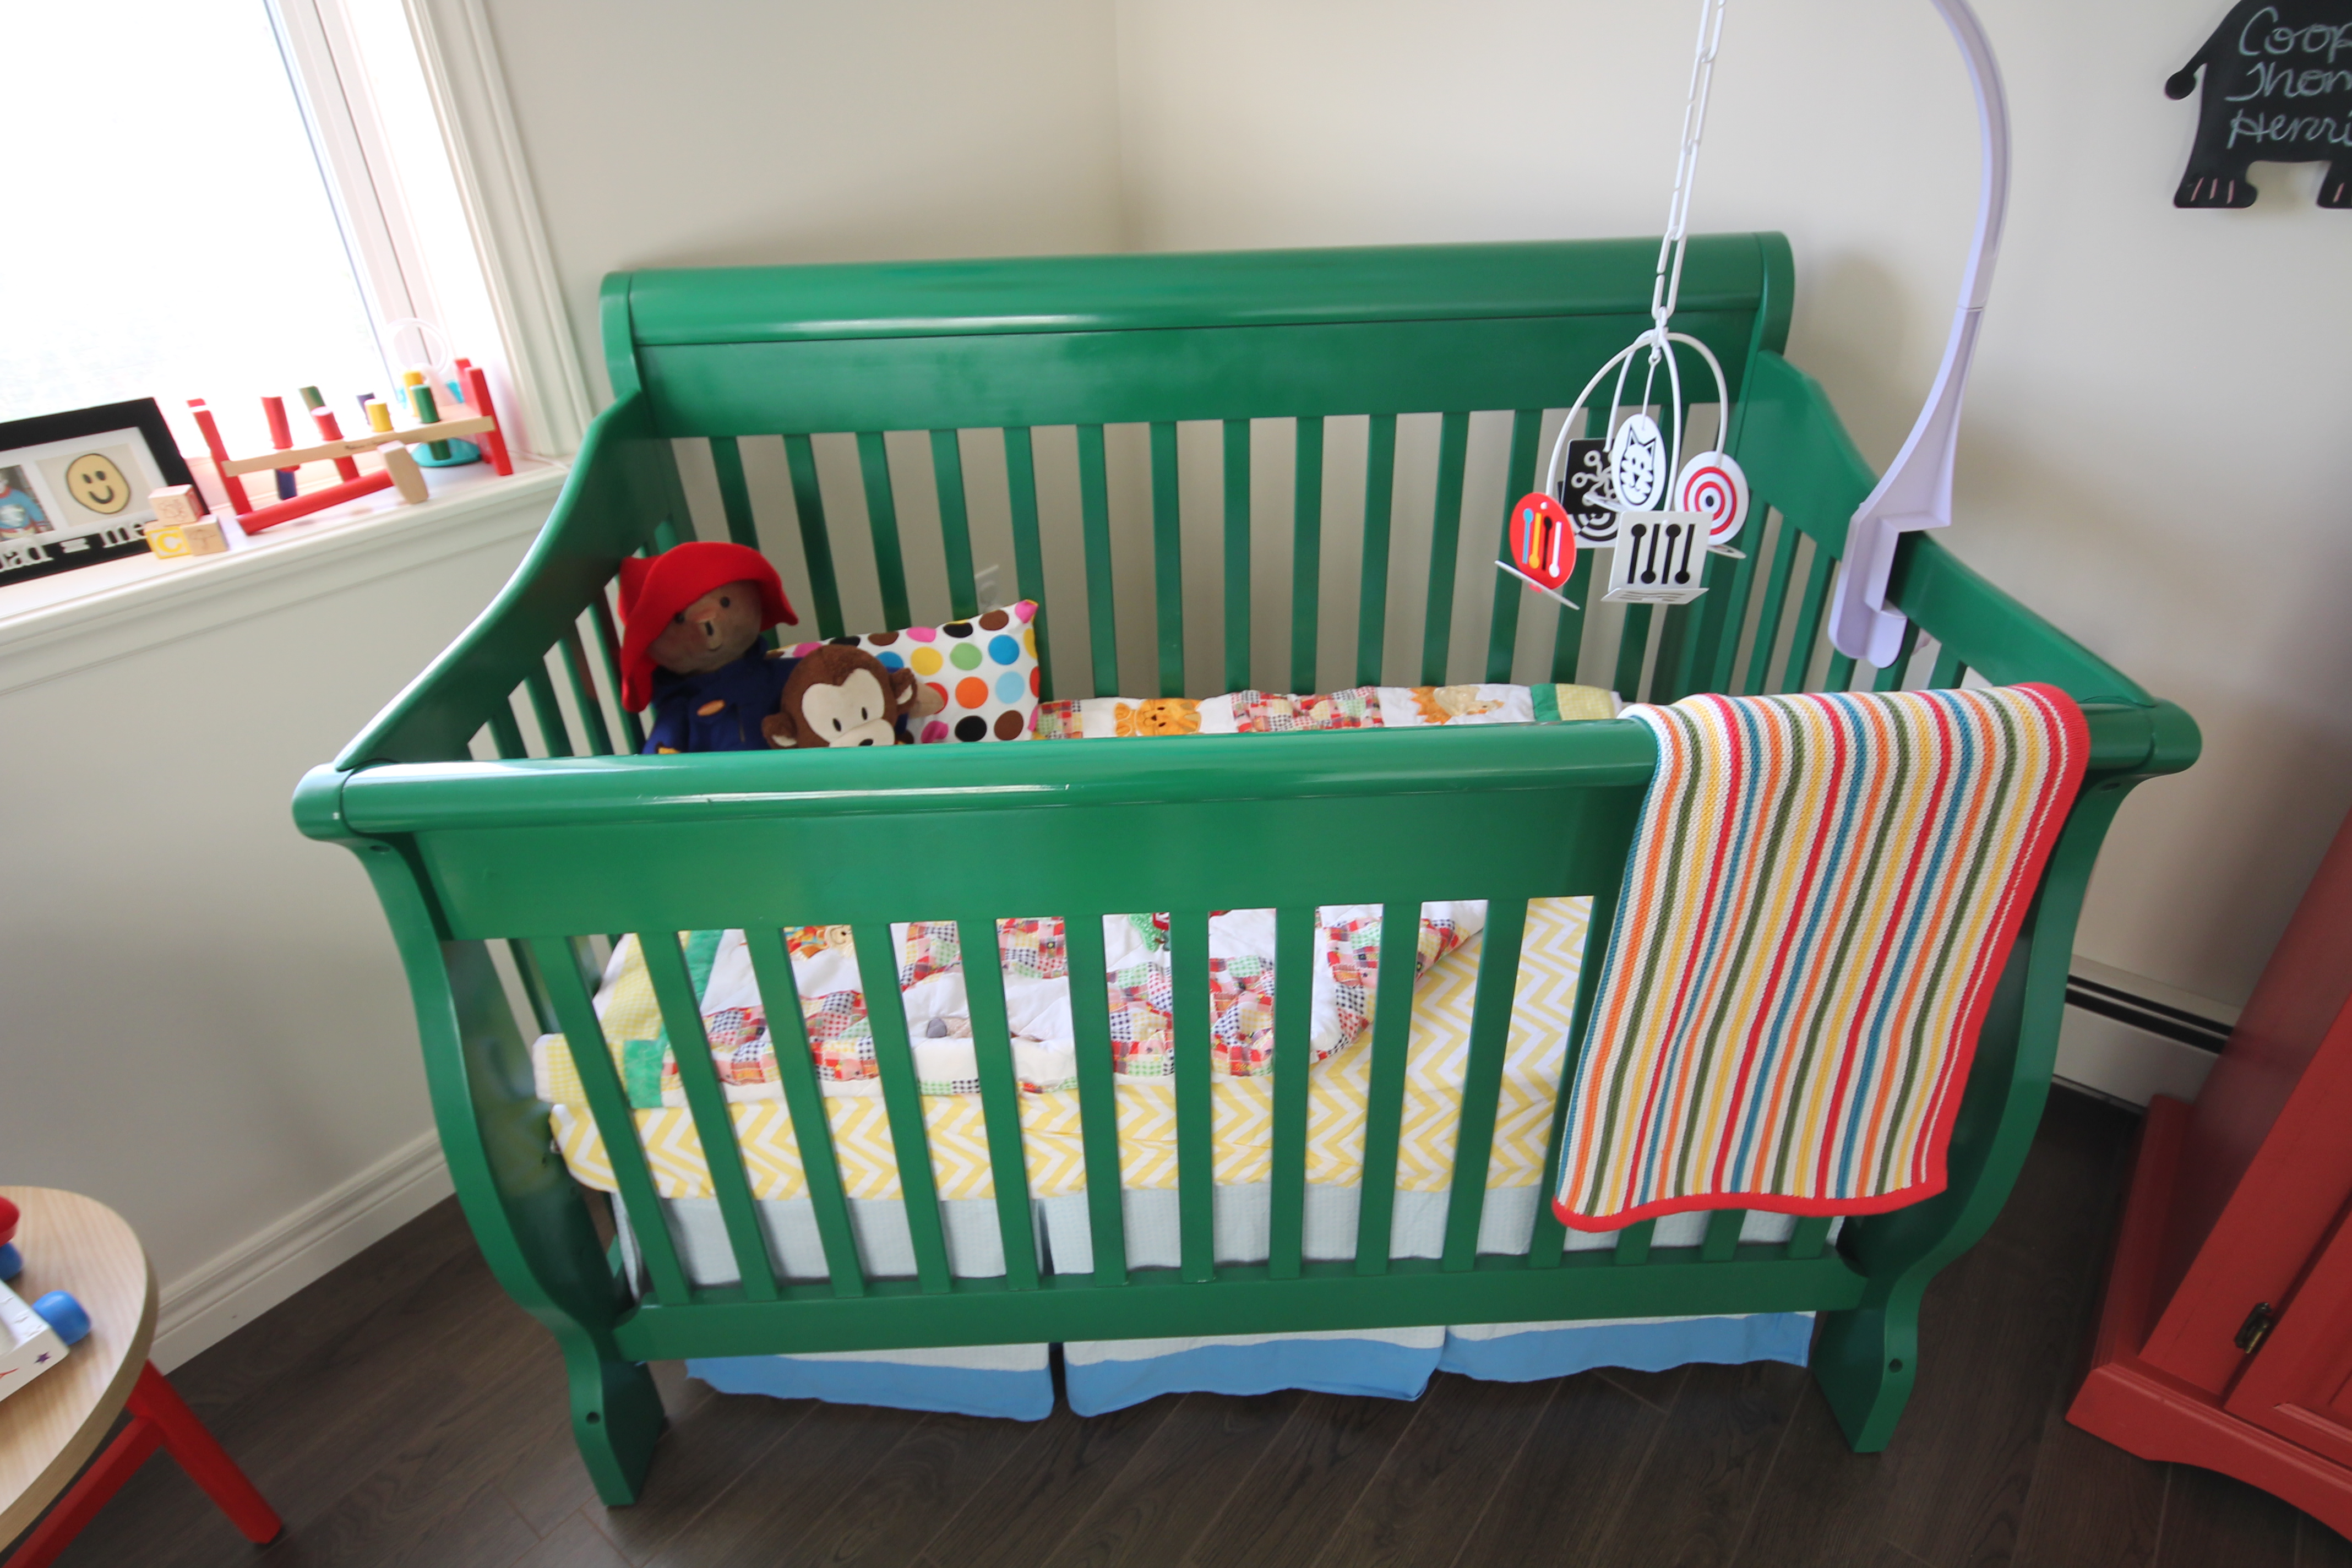 Refinished Kelly Green Crib in this Bright and Colorful Nursery